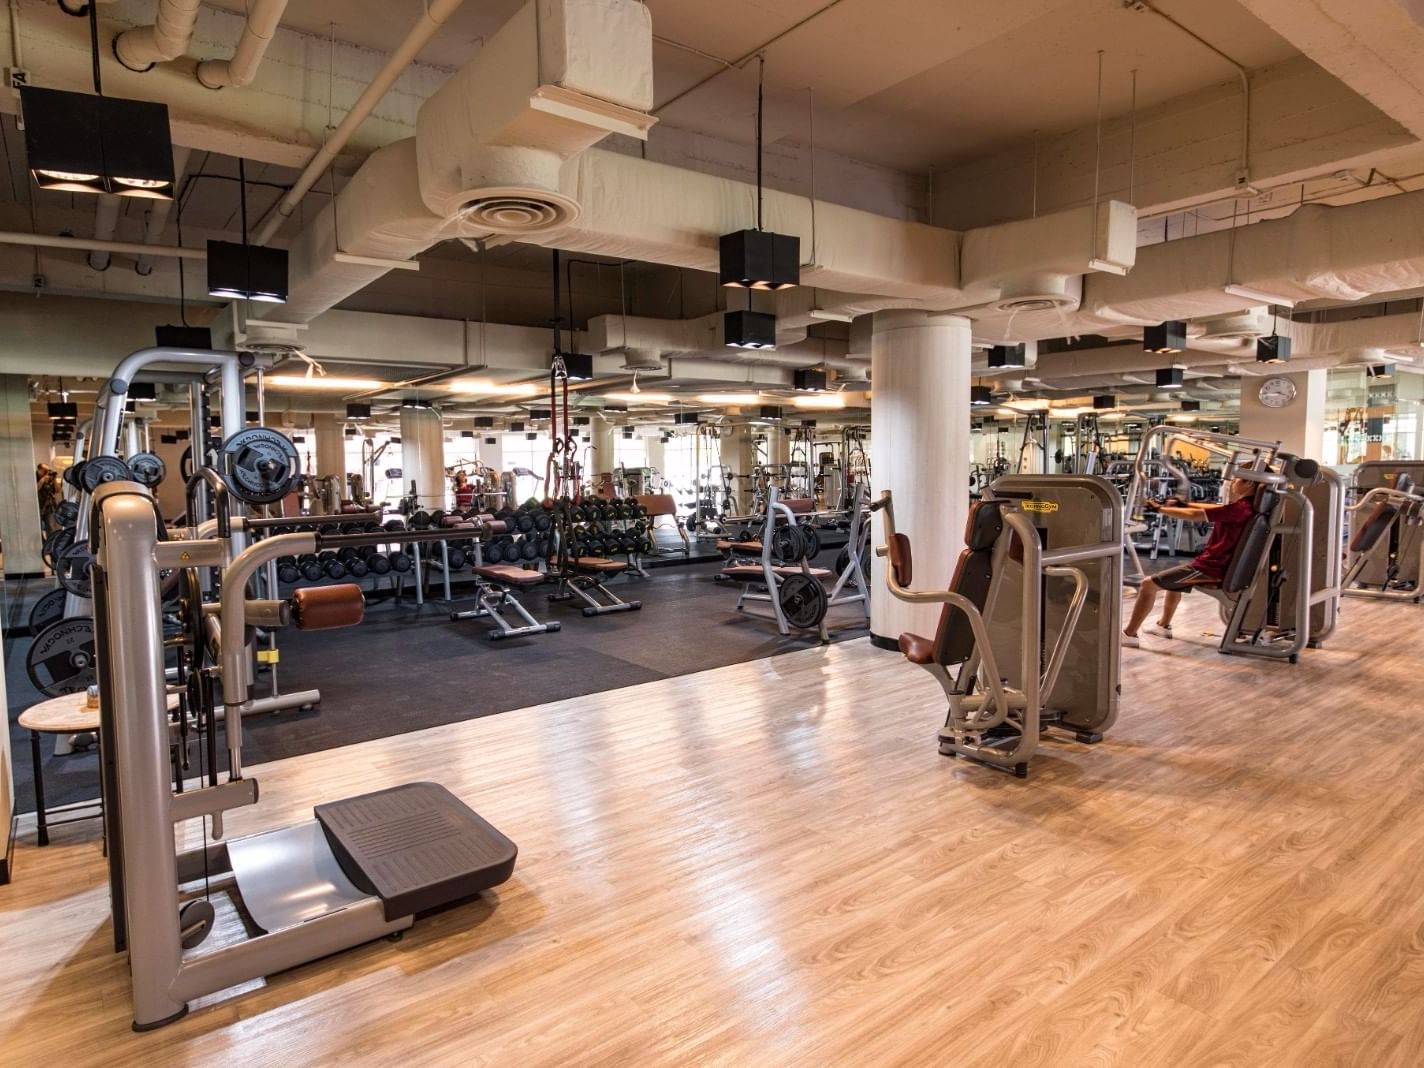 Well-equipped fitness center at Eastin Hotels